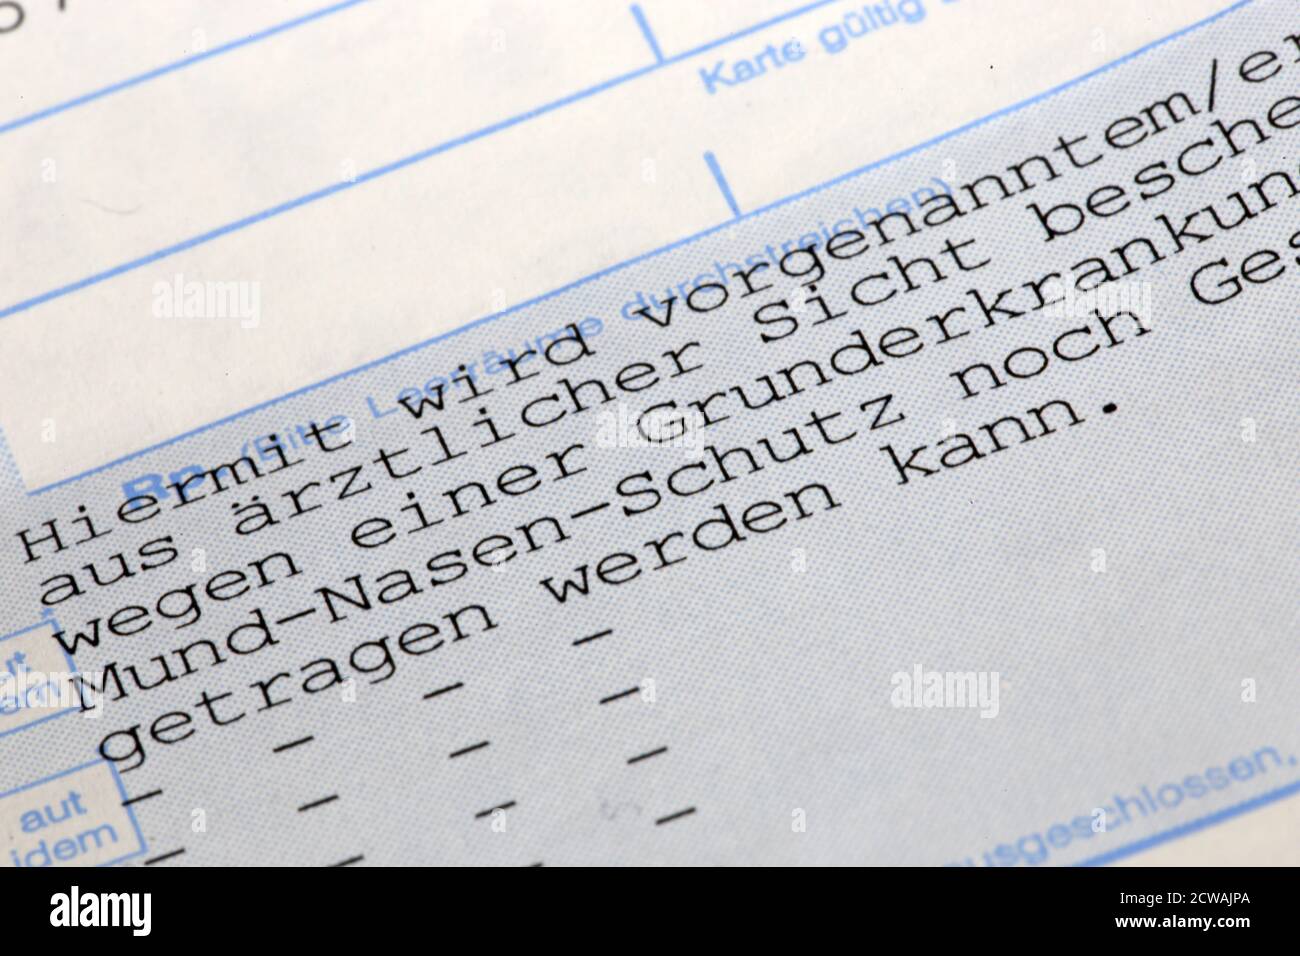 Medical certificate for mask exemption, Germany Stock Photo